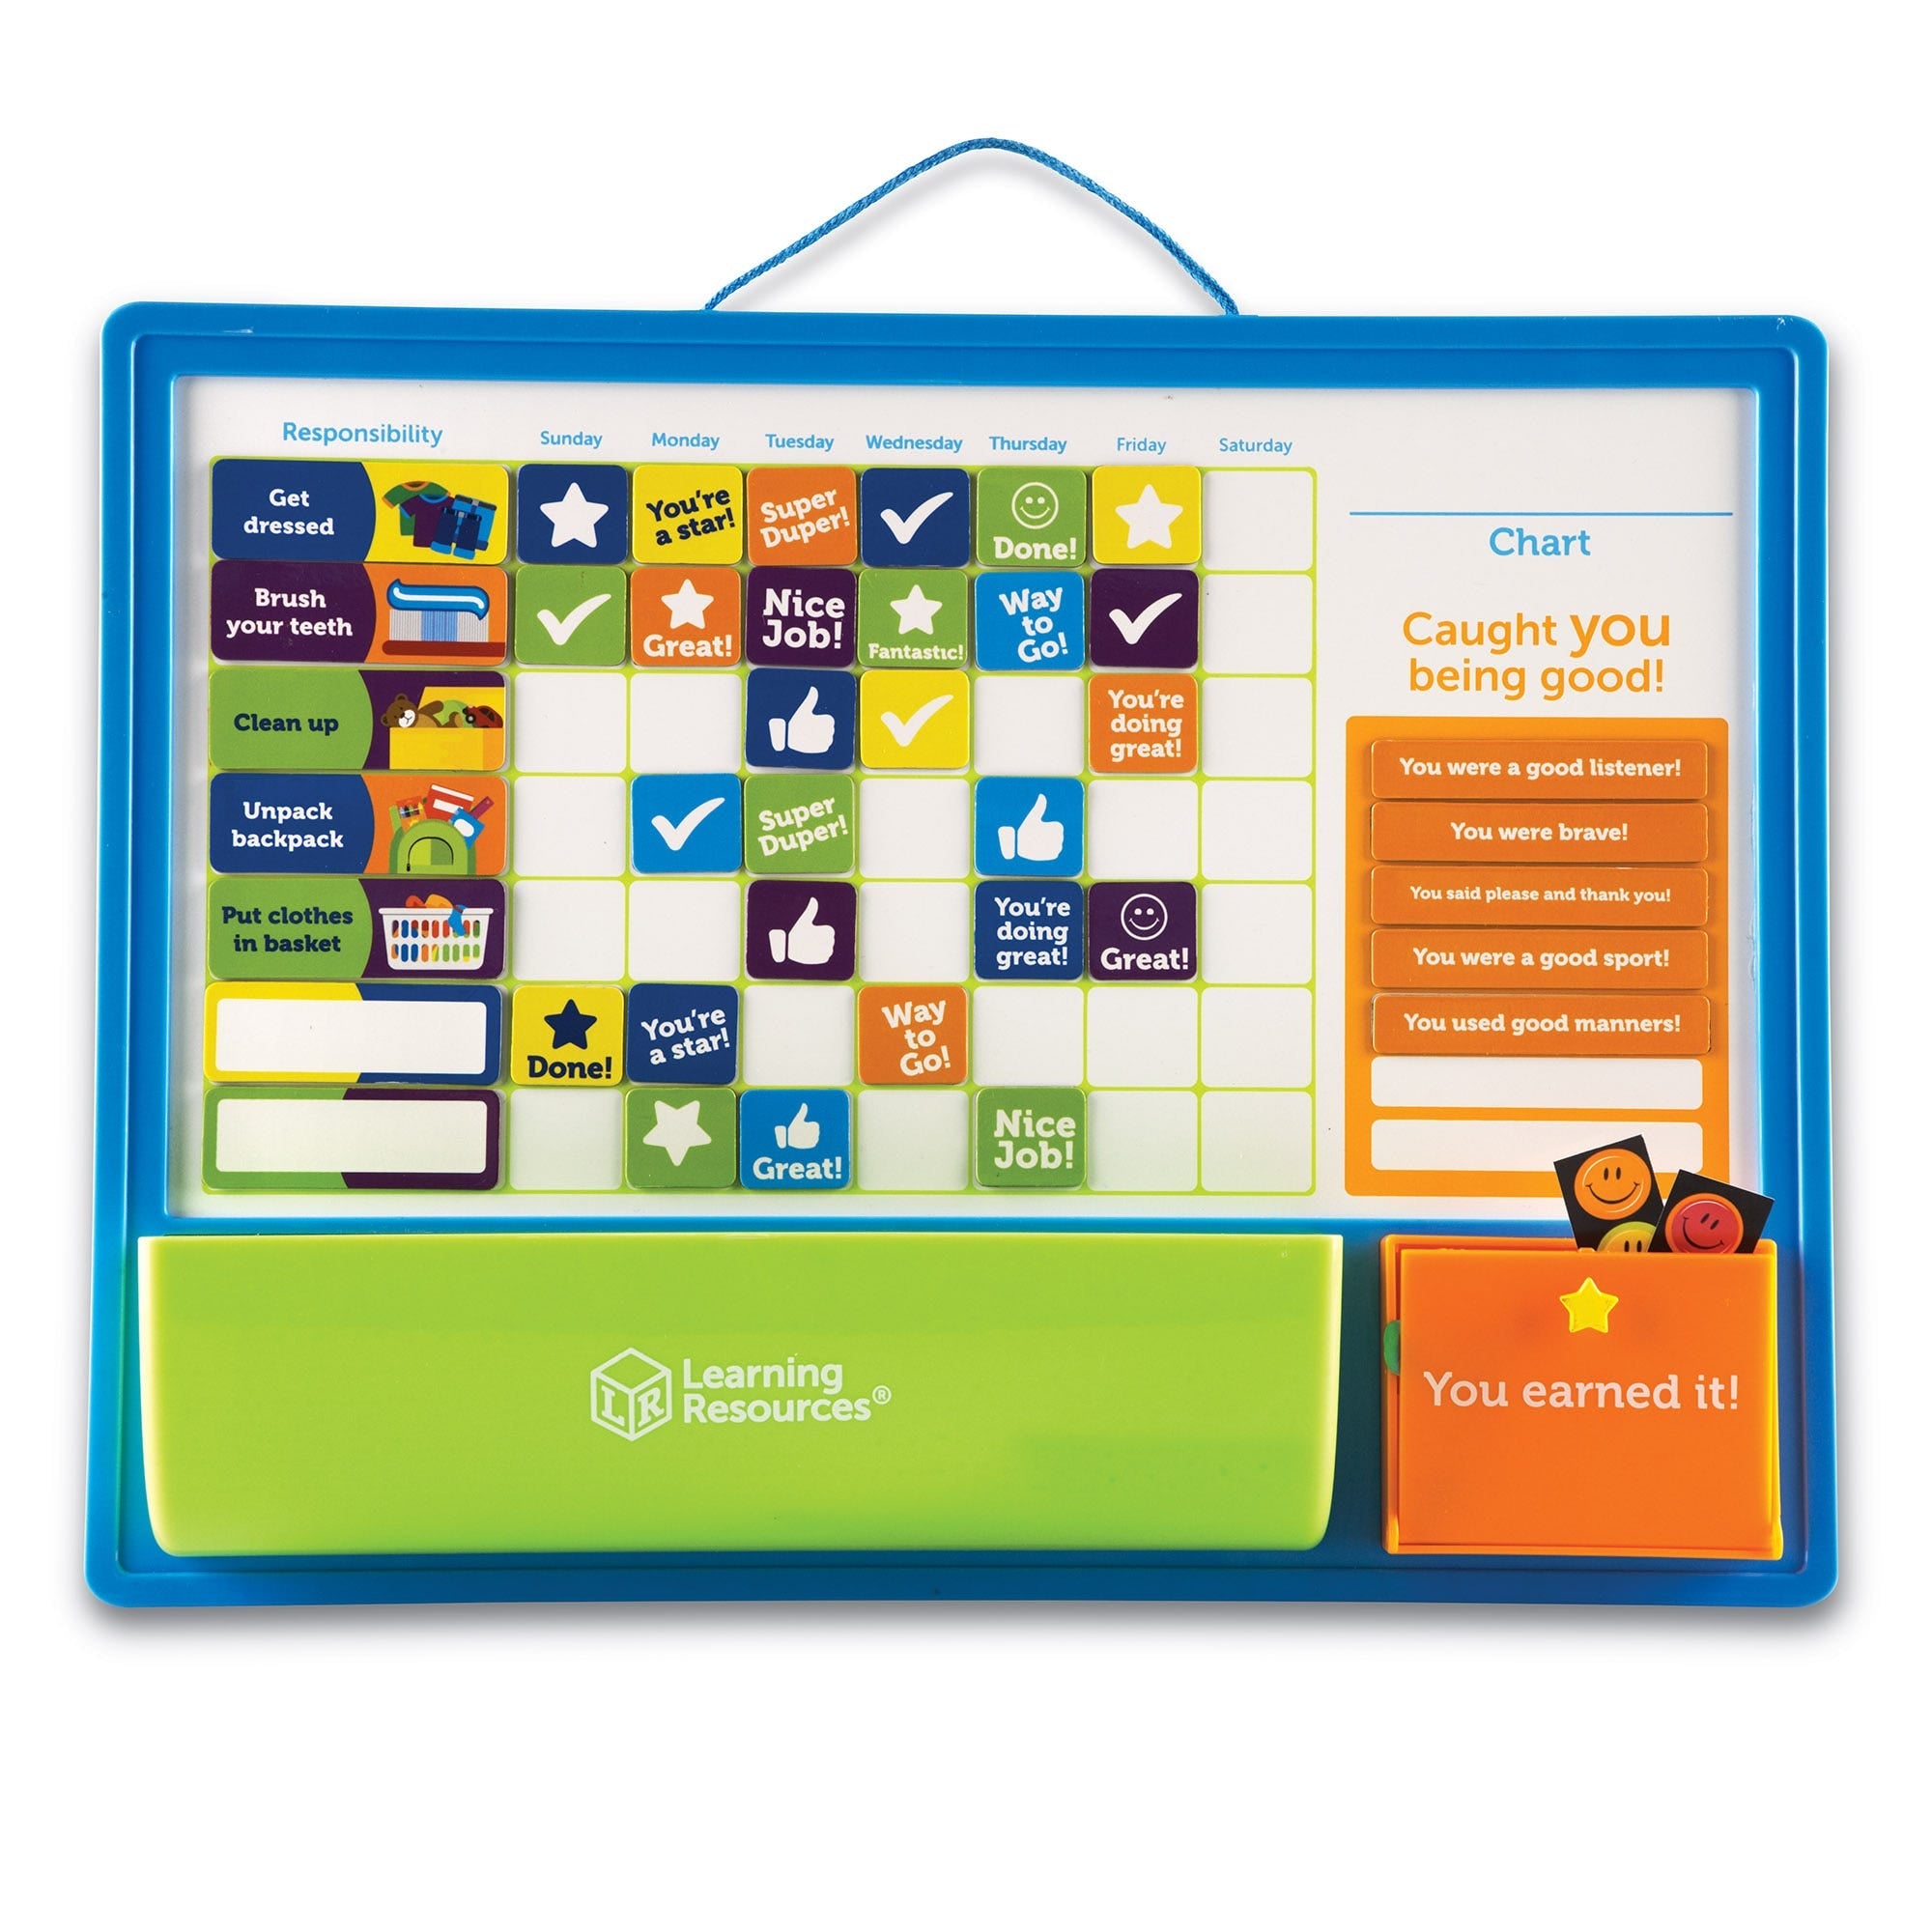 Good Job Reward Chart, The Good Job Reward Chart offers an innovative way to instill good habits and social skills in young children. Designed to be both educational and entertaining, this reward chart is an invaluable resource for parents looking to engage their kids in household chores and other important activities. Features of the Good Job Reward Chart: Customization: Task Selection: The chart is fully customisable, allowing parents to select chores that are appropriate for their child's age and skill s